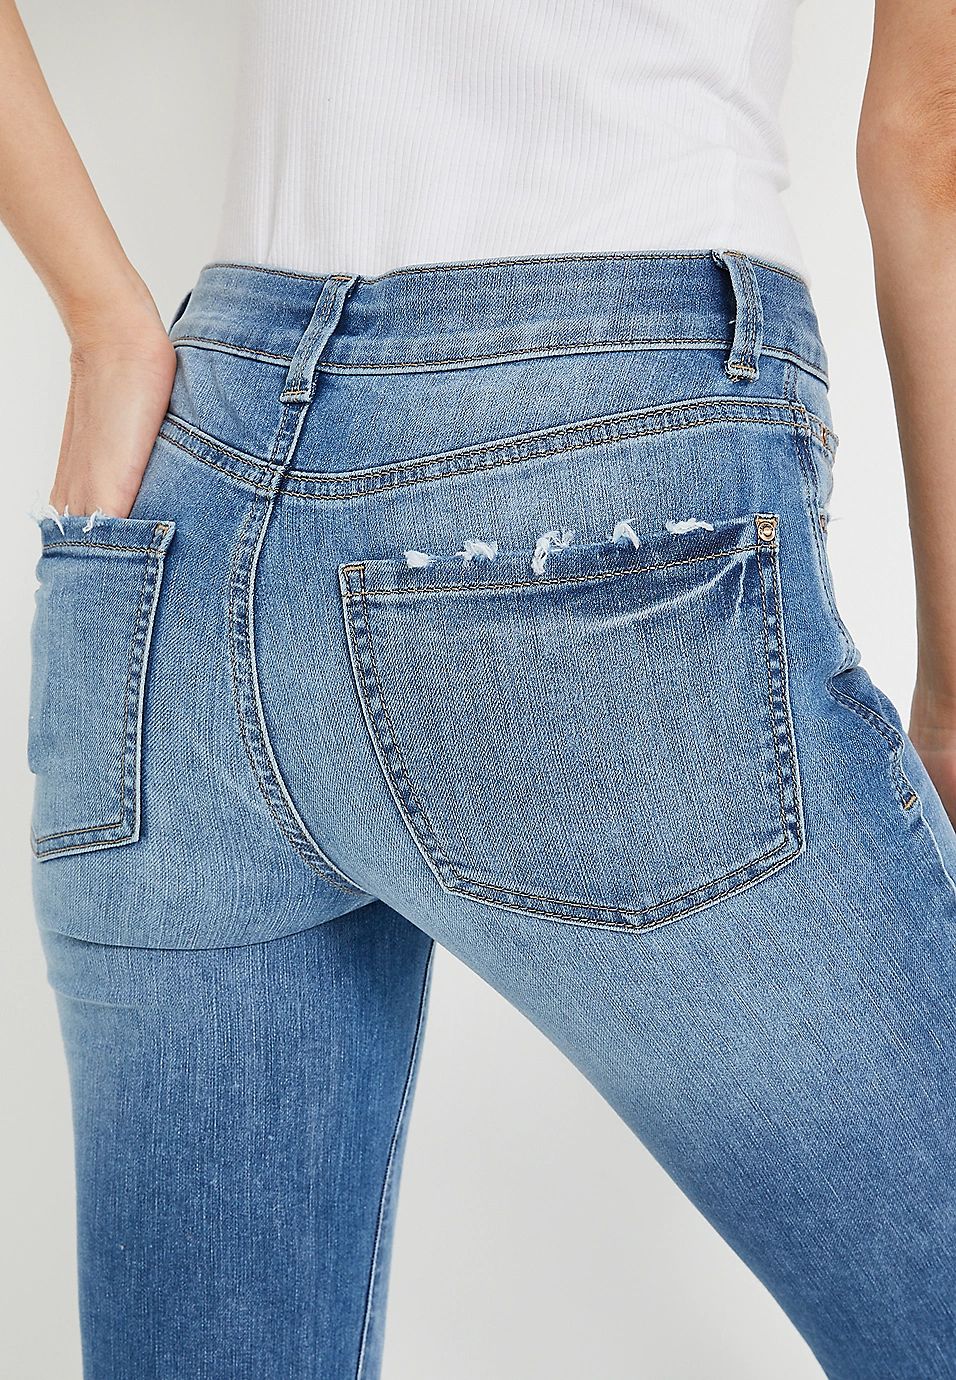 m jeans by maurices™ Everflex™ Skinny High Rise Jean | Maurices